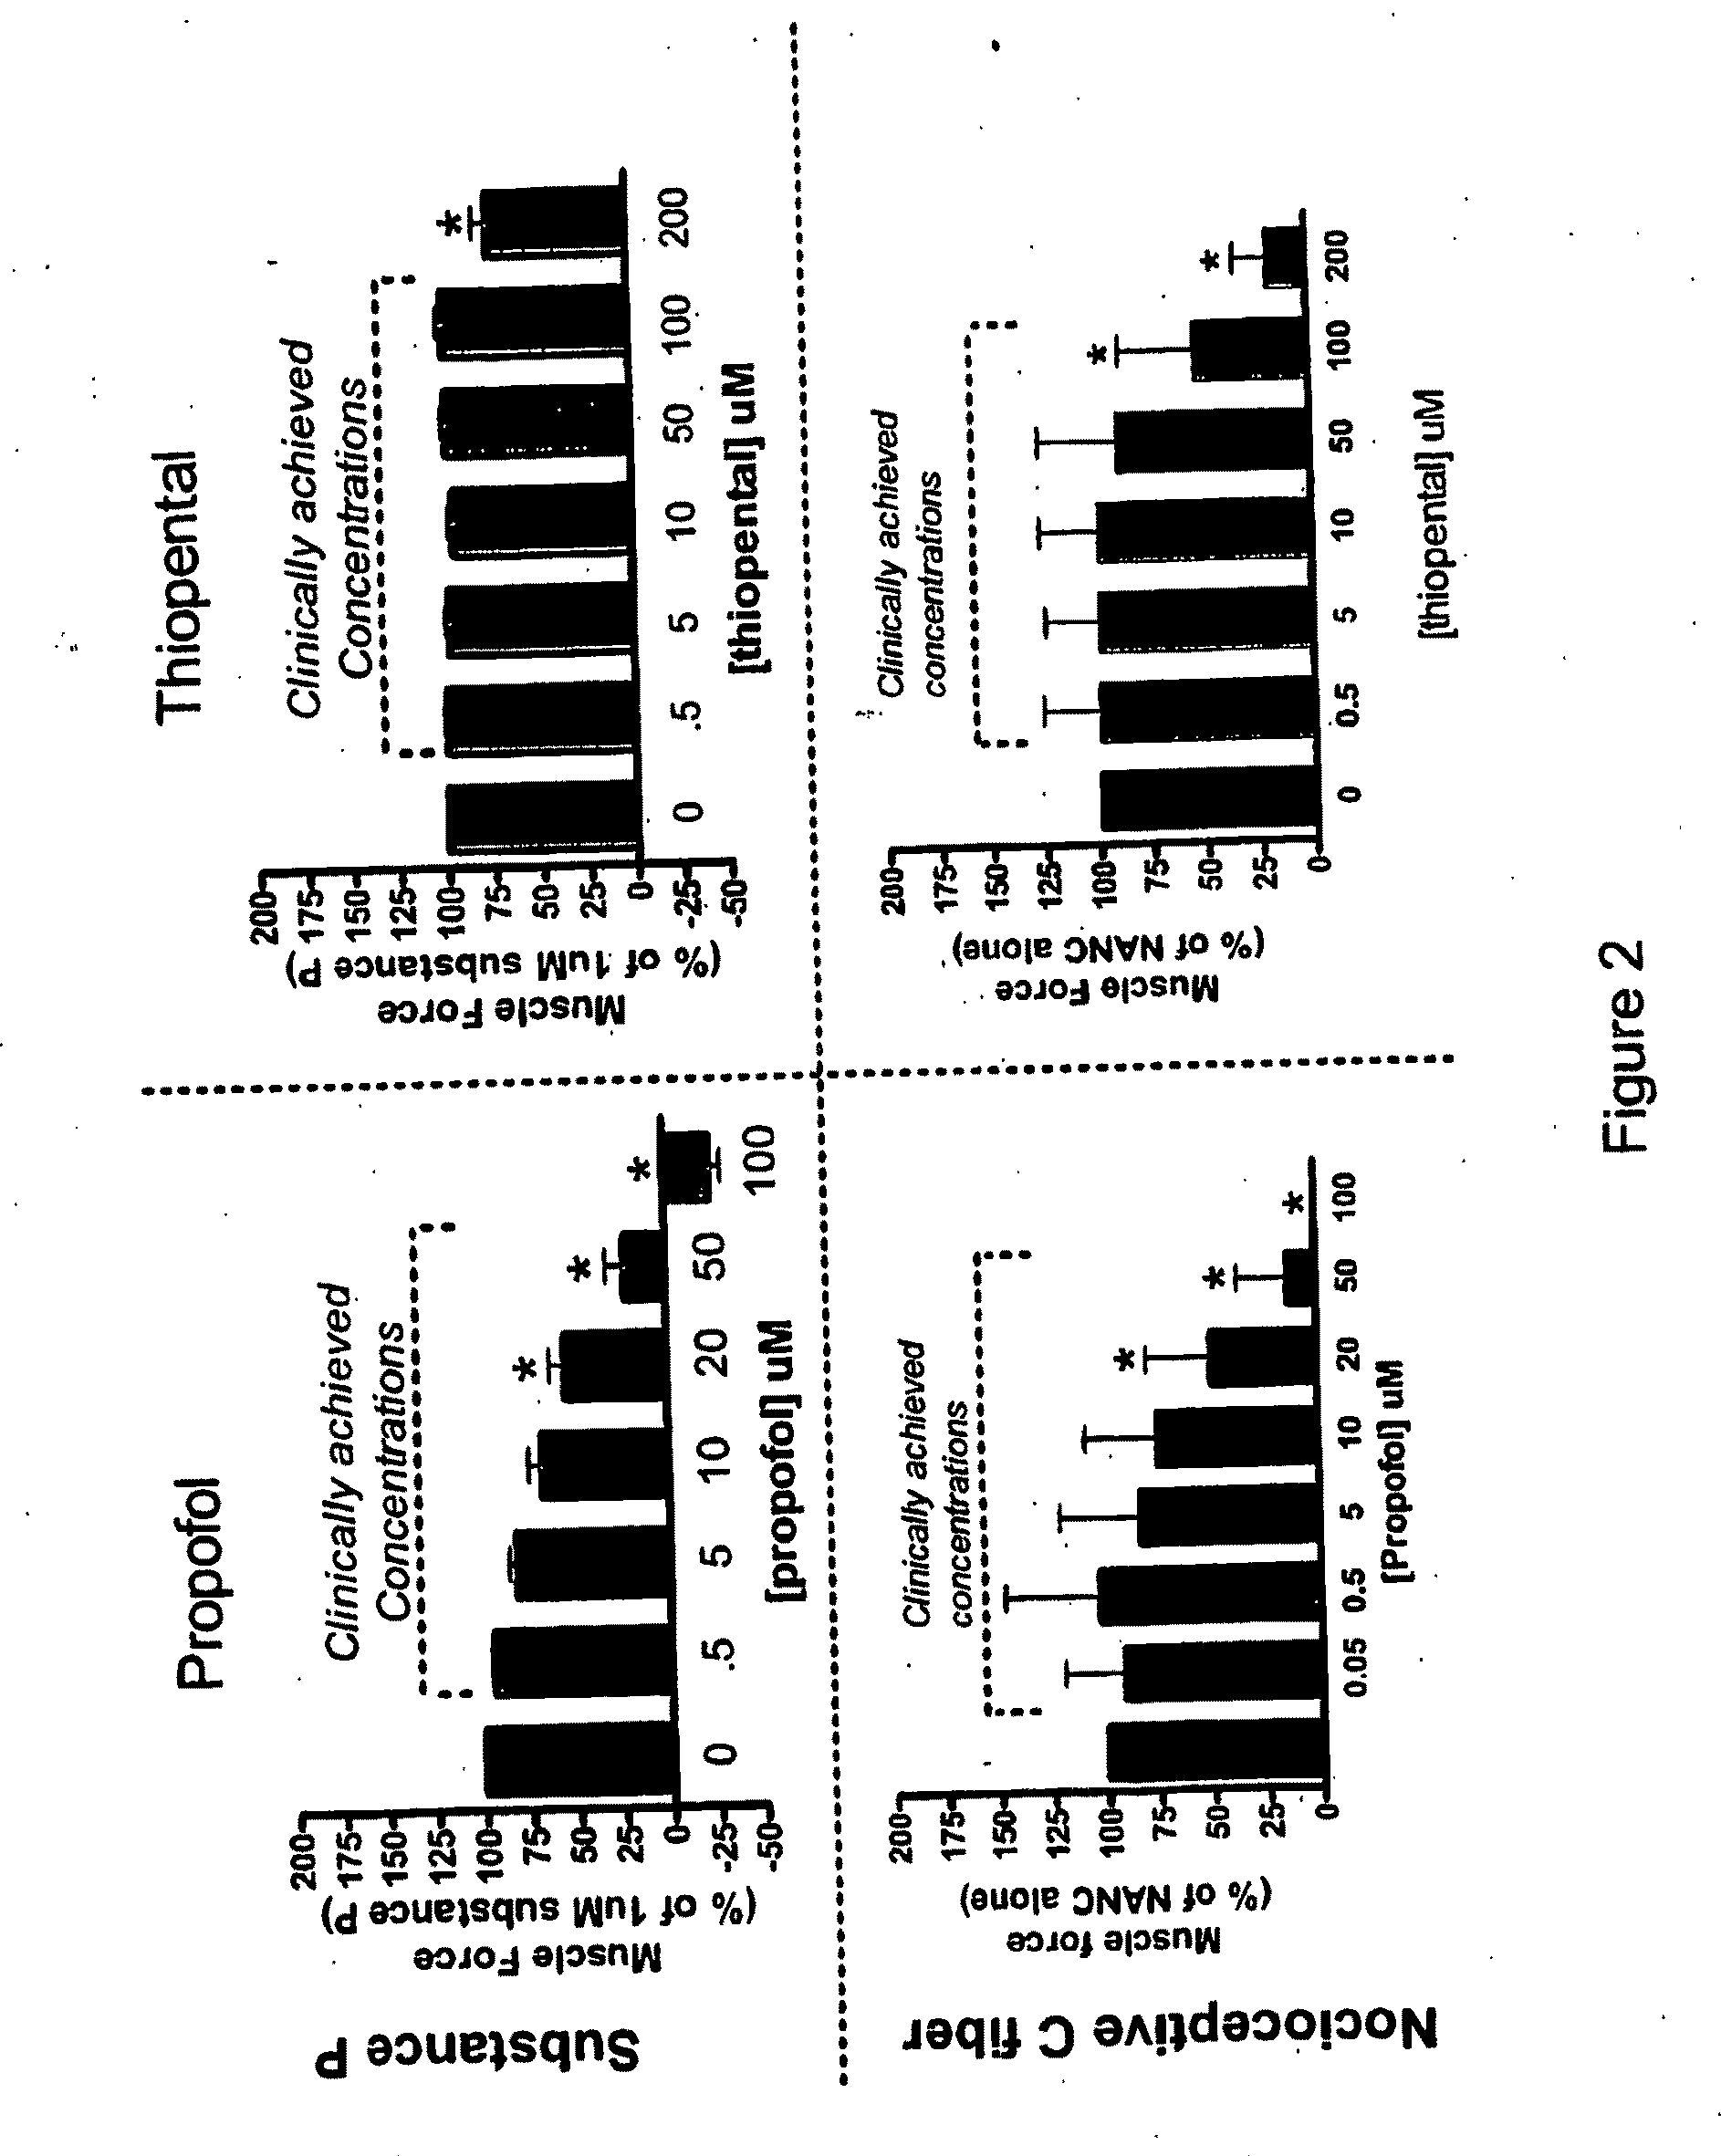 Method of mediating Airway Smooth Muscle Construction Due to Airway Irritation